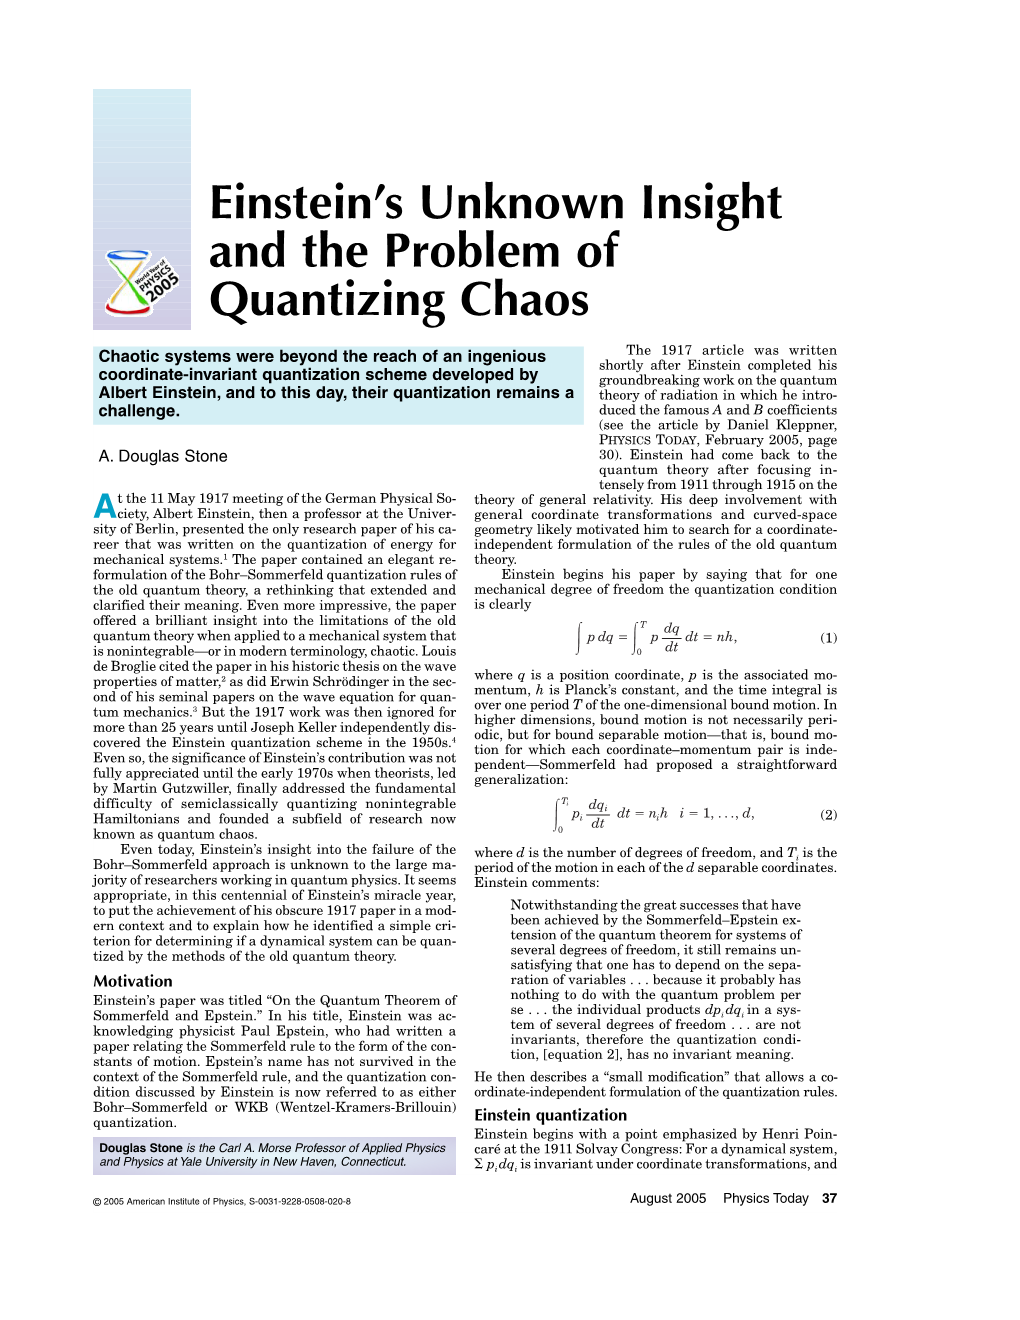 Einstein's Unknown Insight and the Problem of Quantizing Chaos